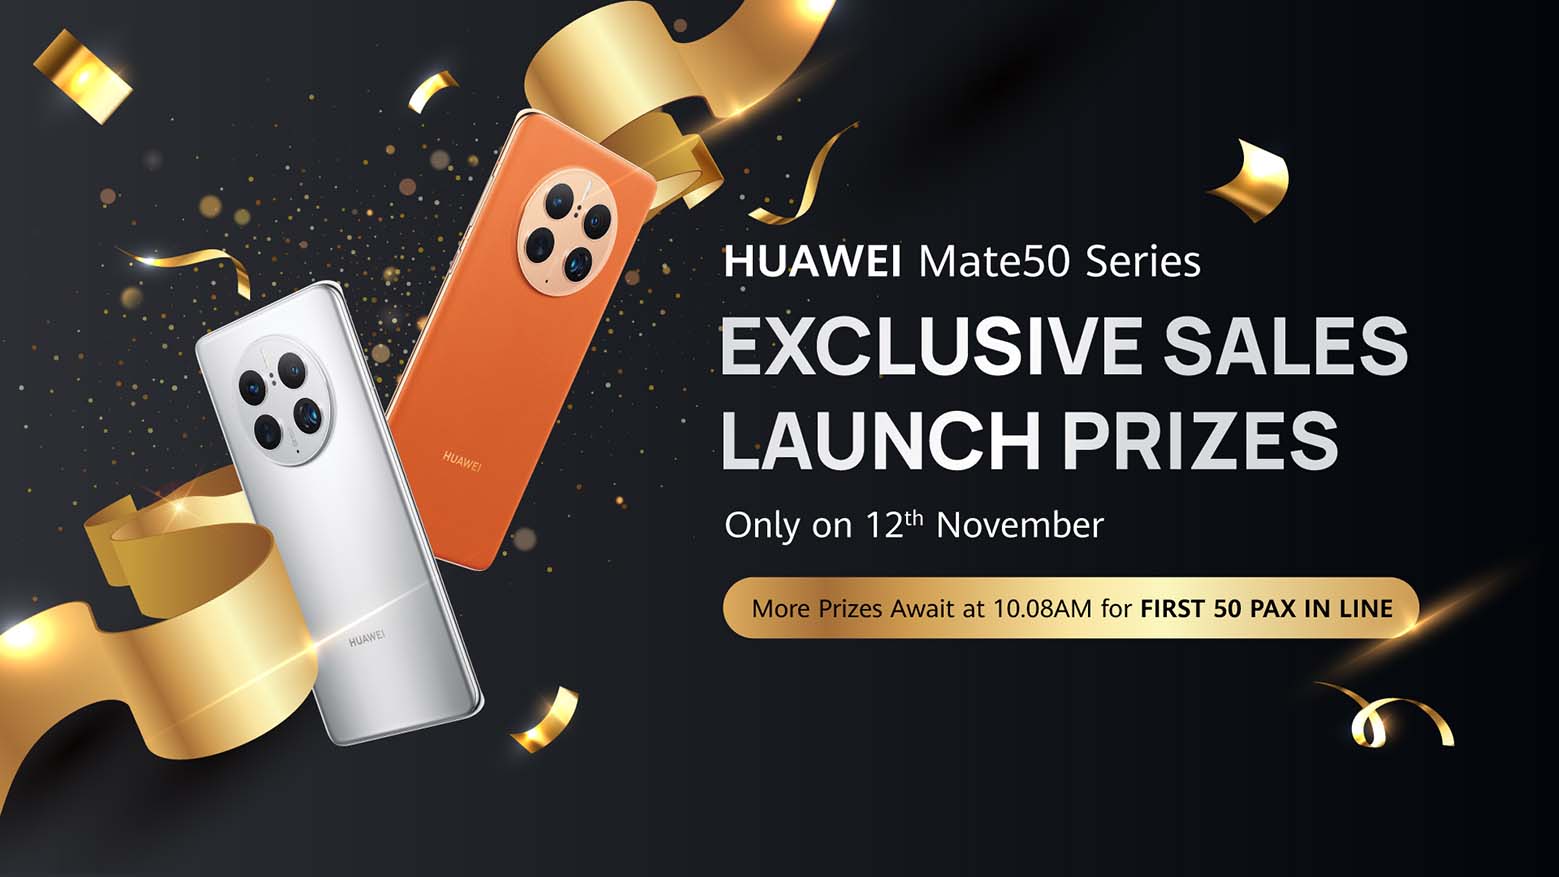 Exclusive Prizes Worth Up to RM6,500 Awaits For HUAWEI Mate50 Series Pre-Order